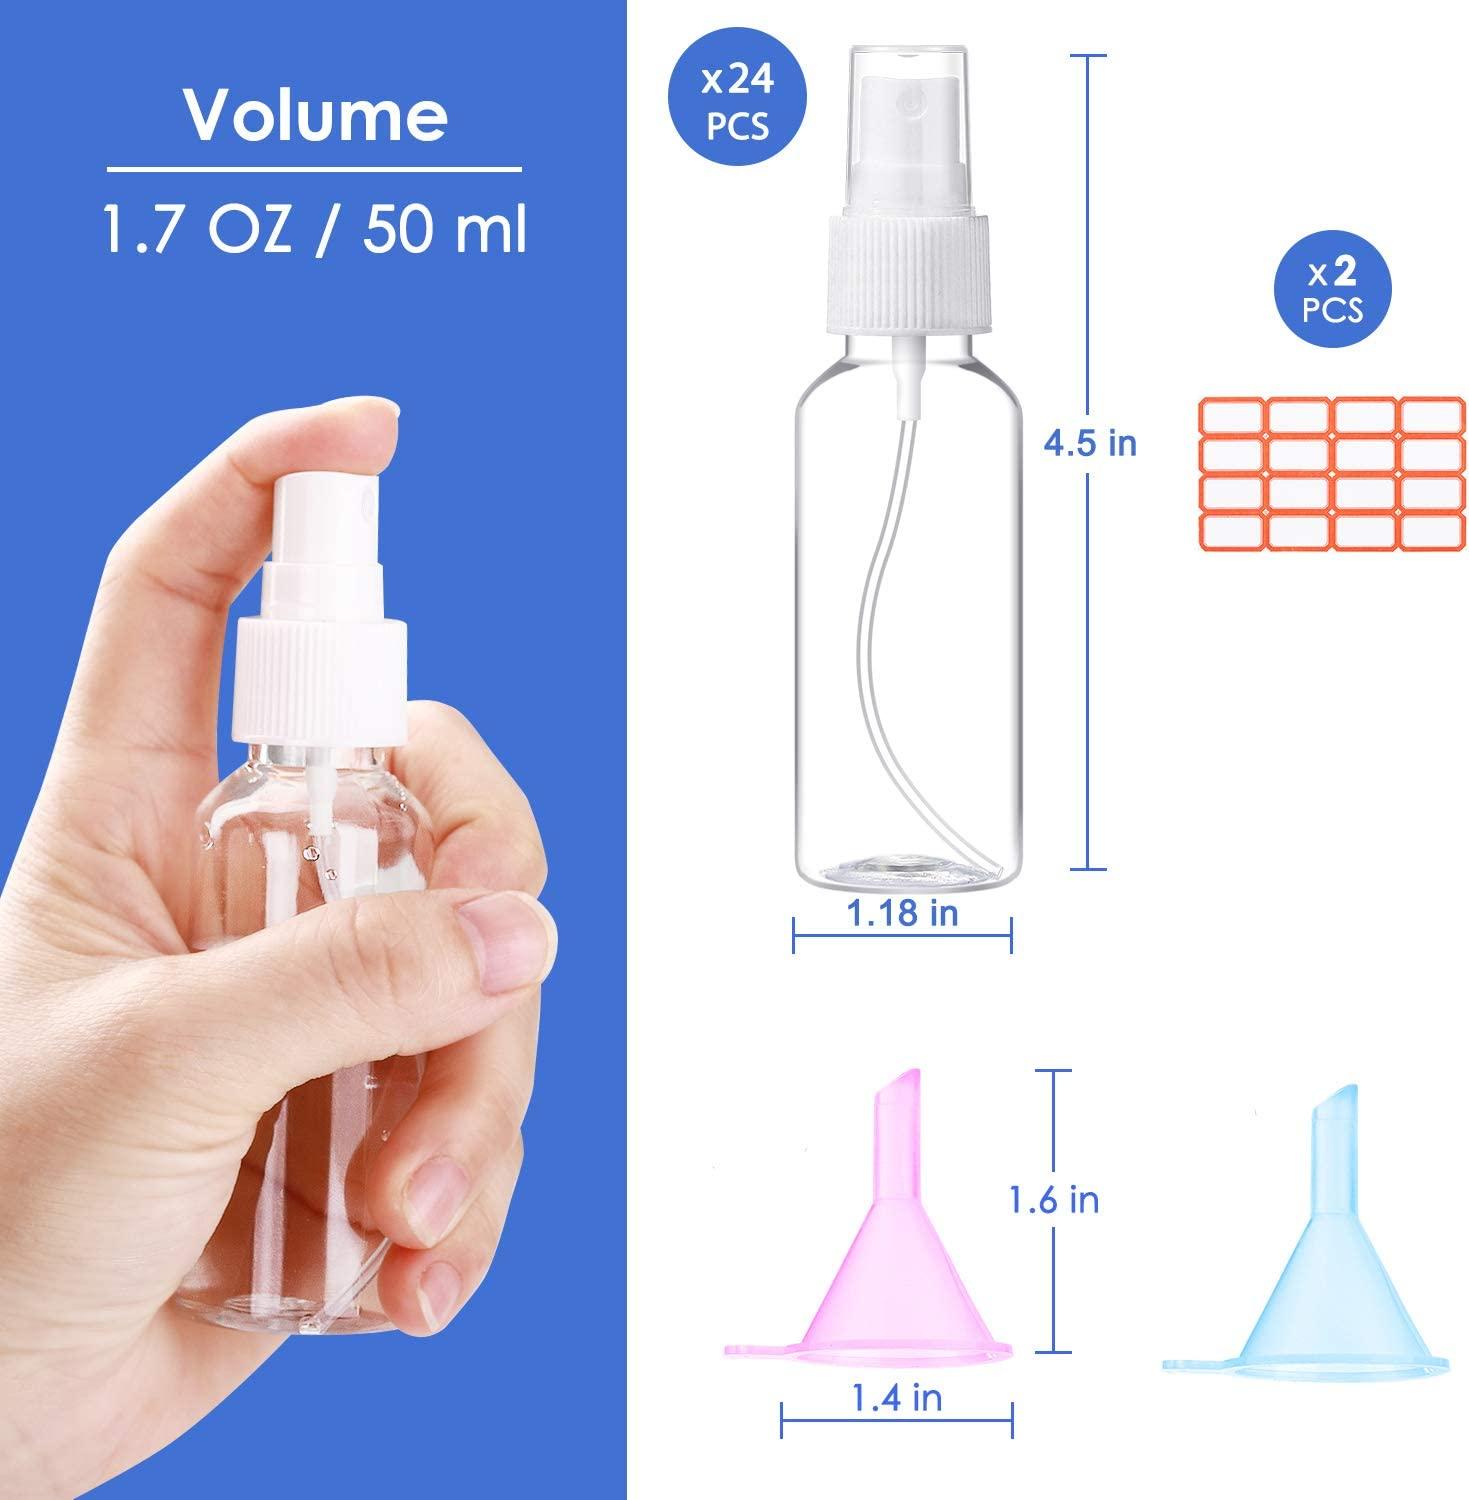 24 Pcs Spray Bottles 2oz / 55ml Clear Empty Mini Mister Spray Bottles  Refillable Container Pocket Size Sprayer Set Essential Oils Travel Cleaning  Solution Makeup Bottles with 2pcs Funnels 32pcs Labels White